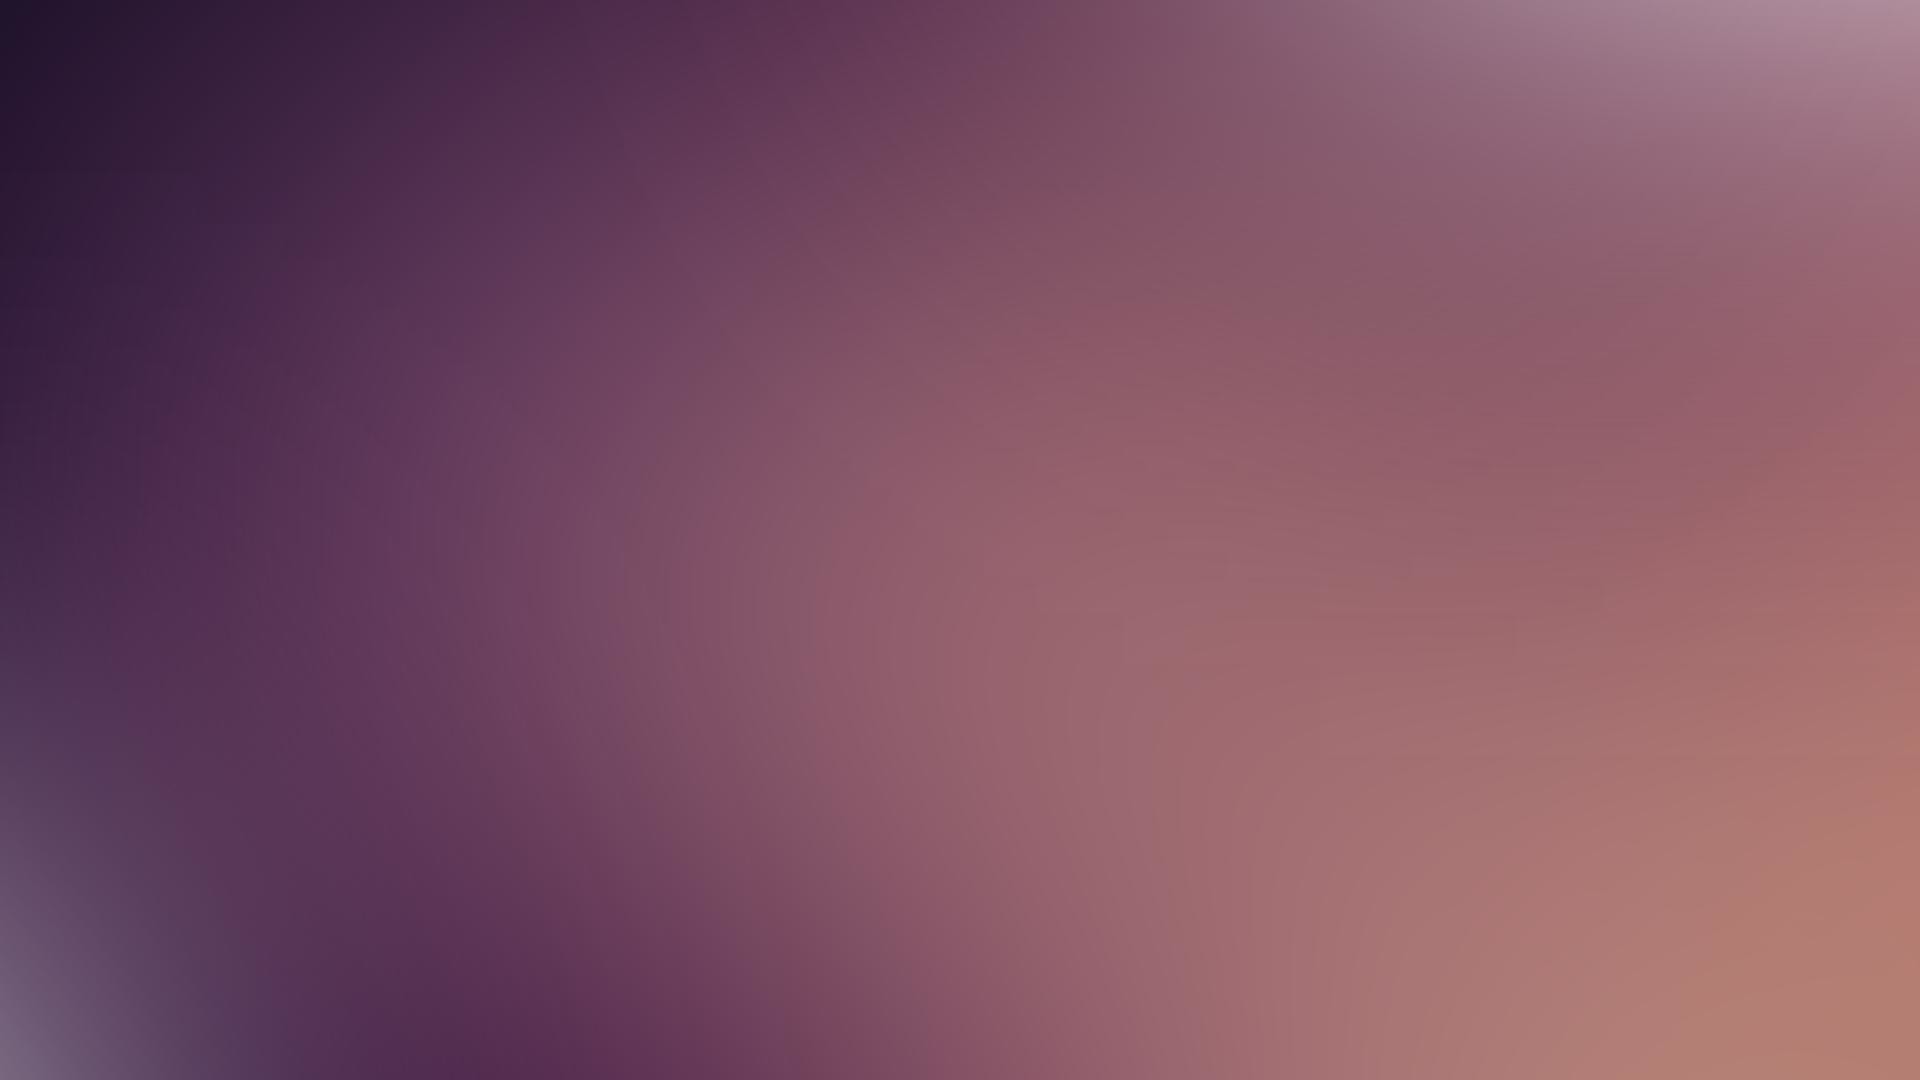 1920x1080 Gradient HD Wallpapers Collection: Item for PC & Mac, Tablet, Laptop, Mobile